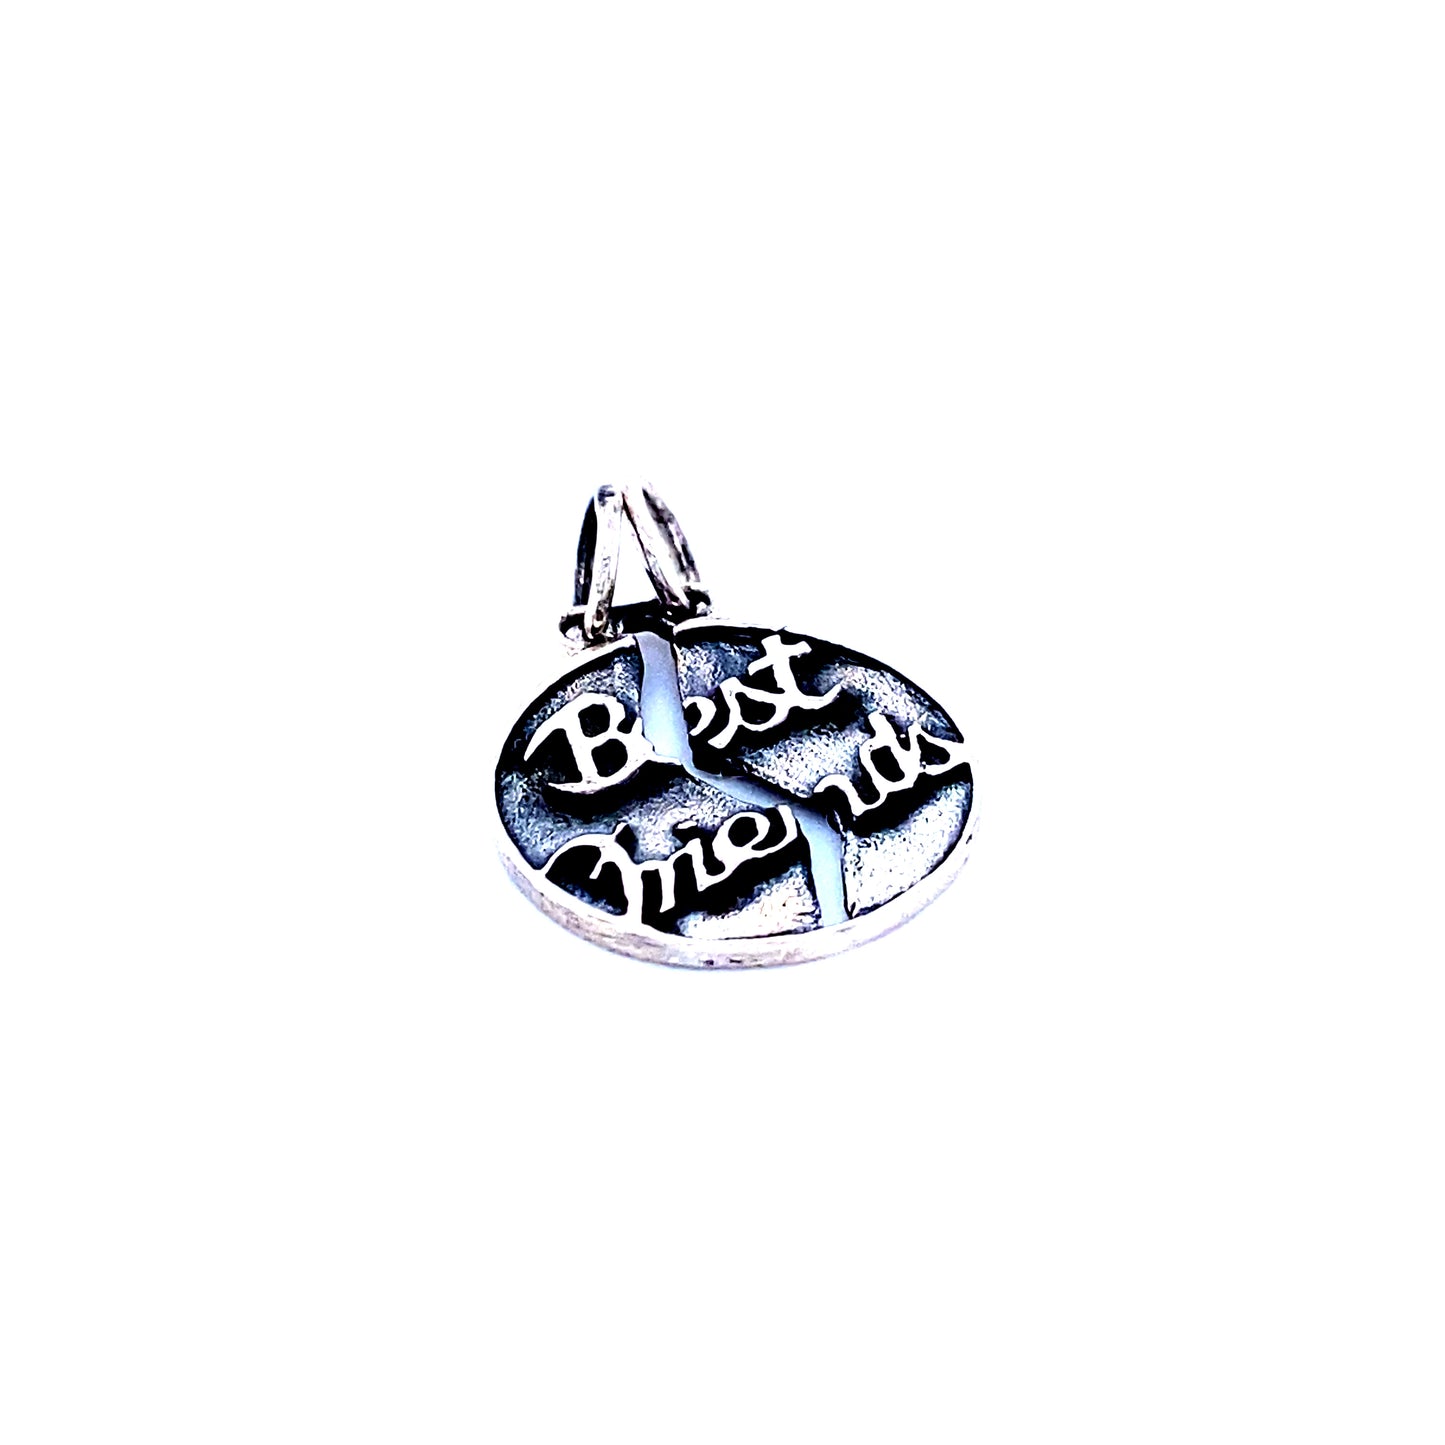 An "Best Friends" Break Apart Charm made of sterling silver, engraved with the words "best friend", by Super Silver.